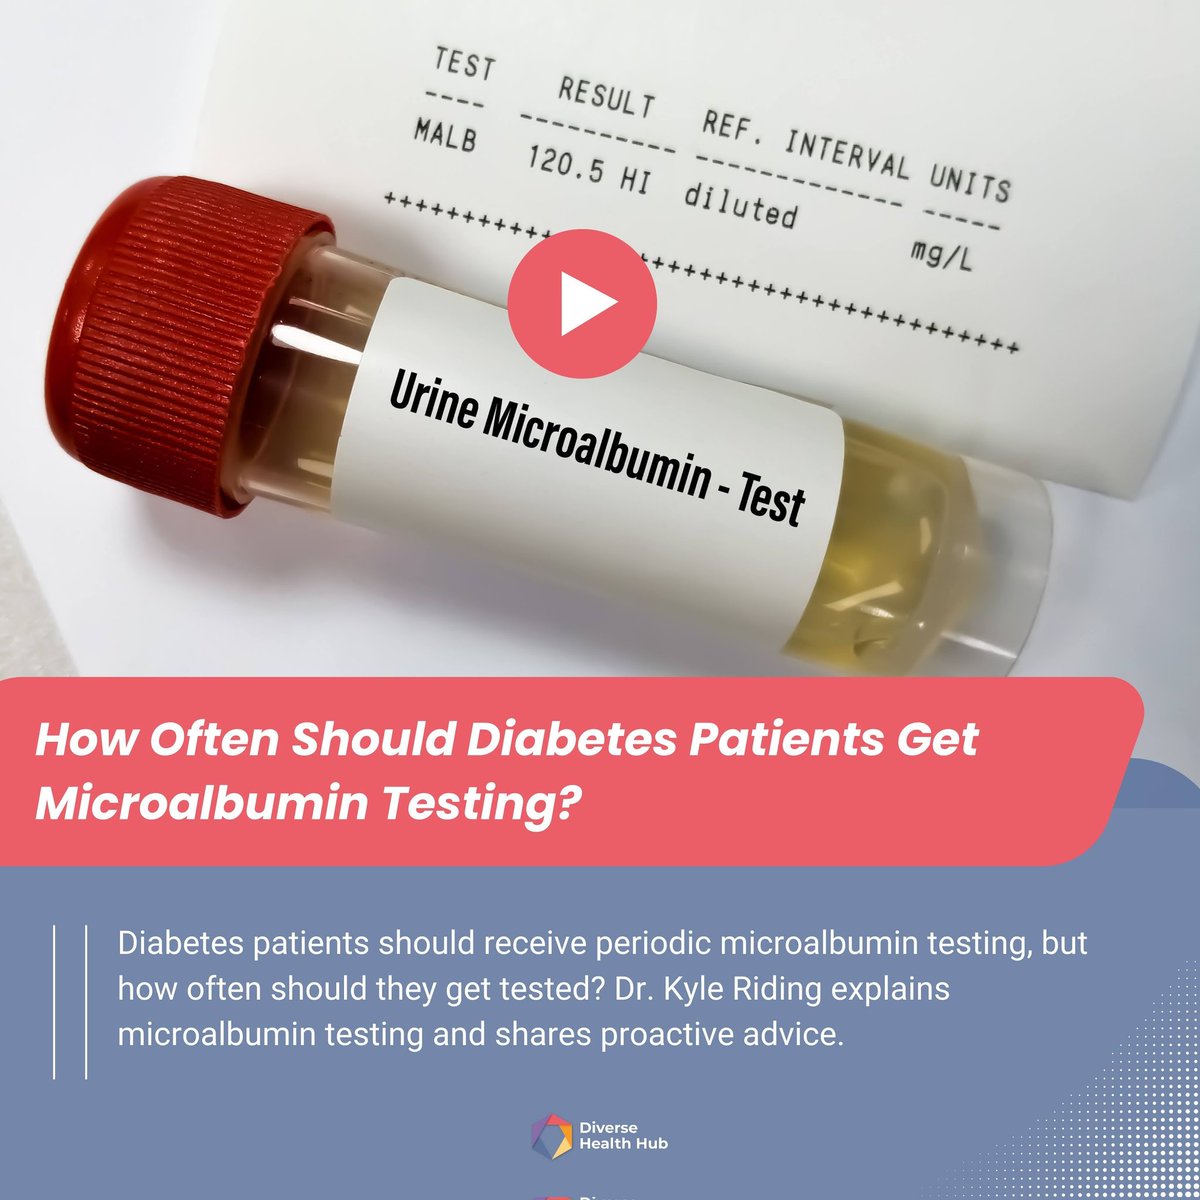 Do you have less than 5 mins to watch our latest #diagnosticsdecoded 🎥 featuring Dr. Kyle Riding @KRidingMLS? He explains how often diabetes patients should get microalbumin testing and why it’s crucial for detecting early signs of kidney damage.  Watch: bit.ly/3xoHdI2